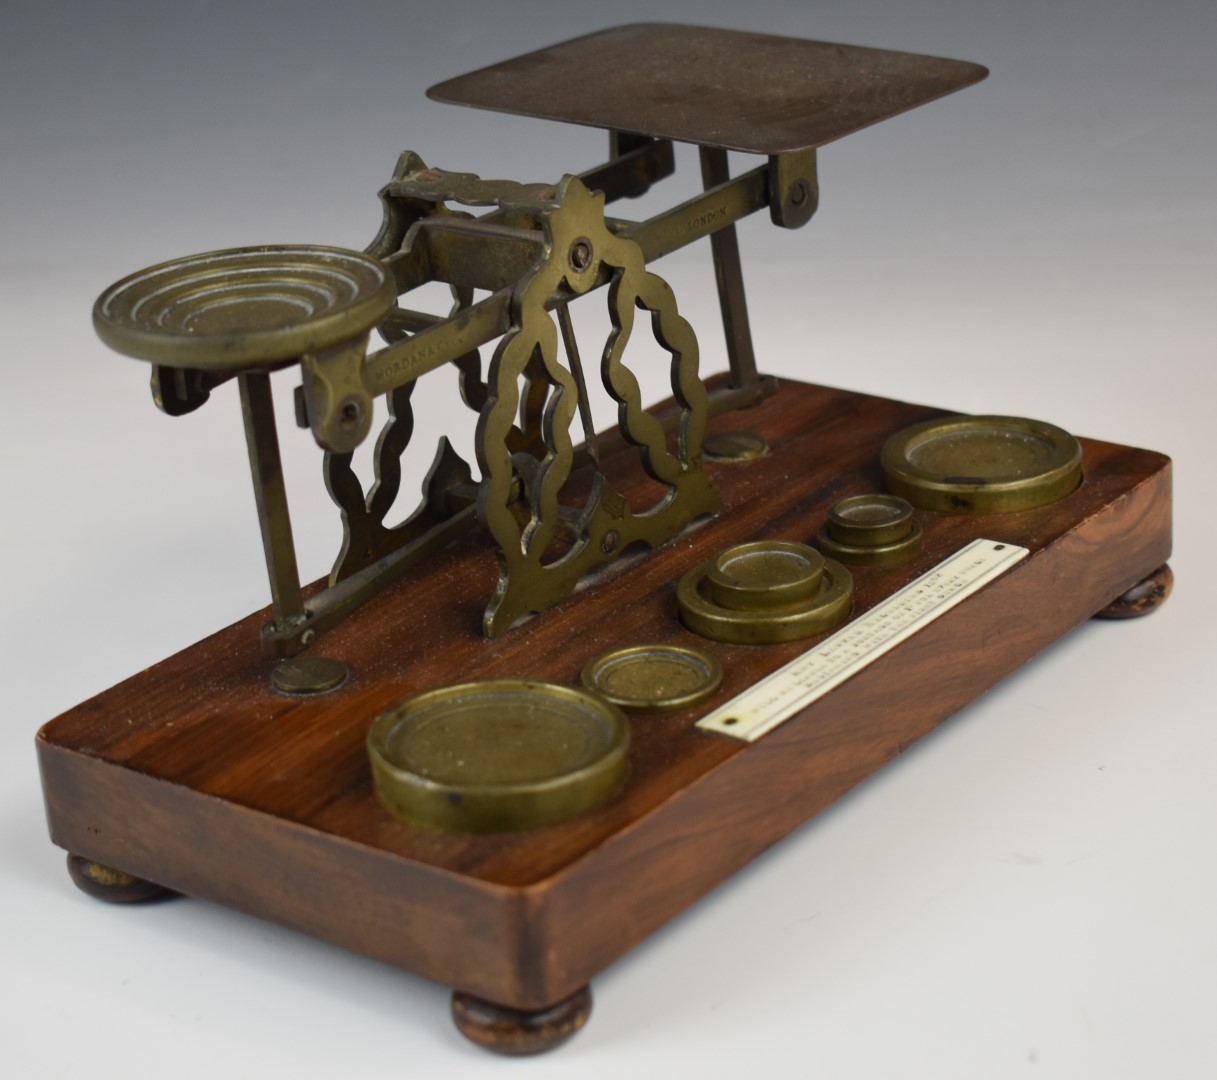 Mordan & Co. Victorian brass postage scales, on wooden base with weights and with postage rates to - Image 5 of 5